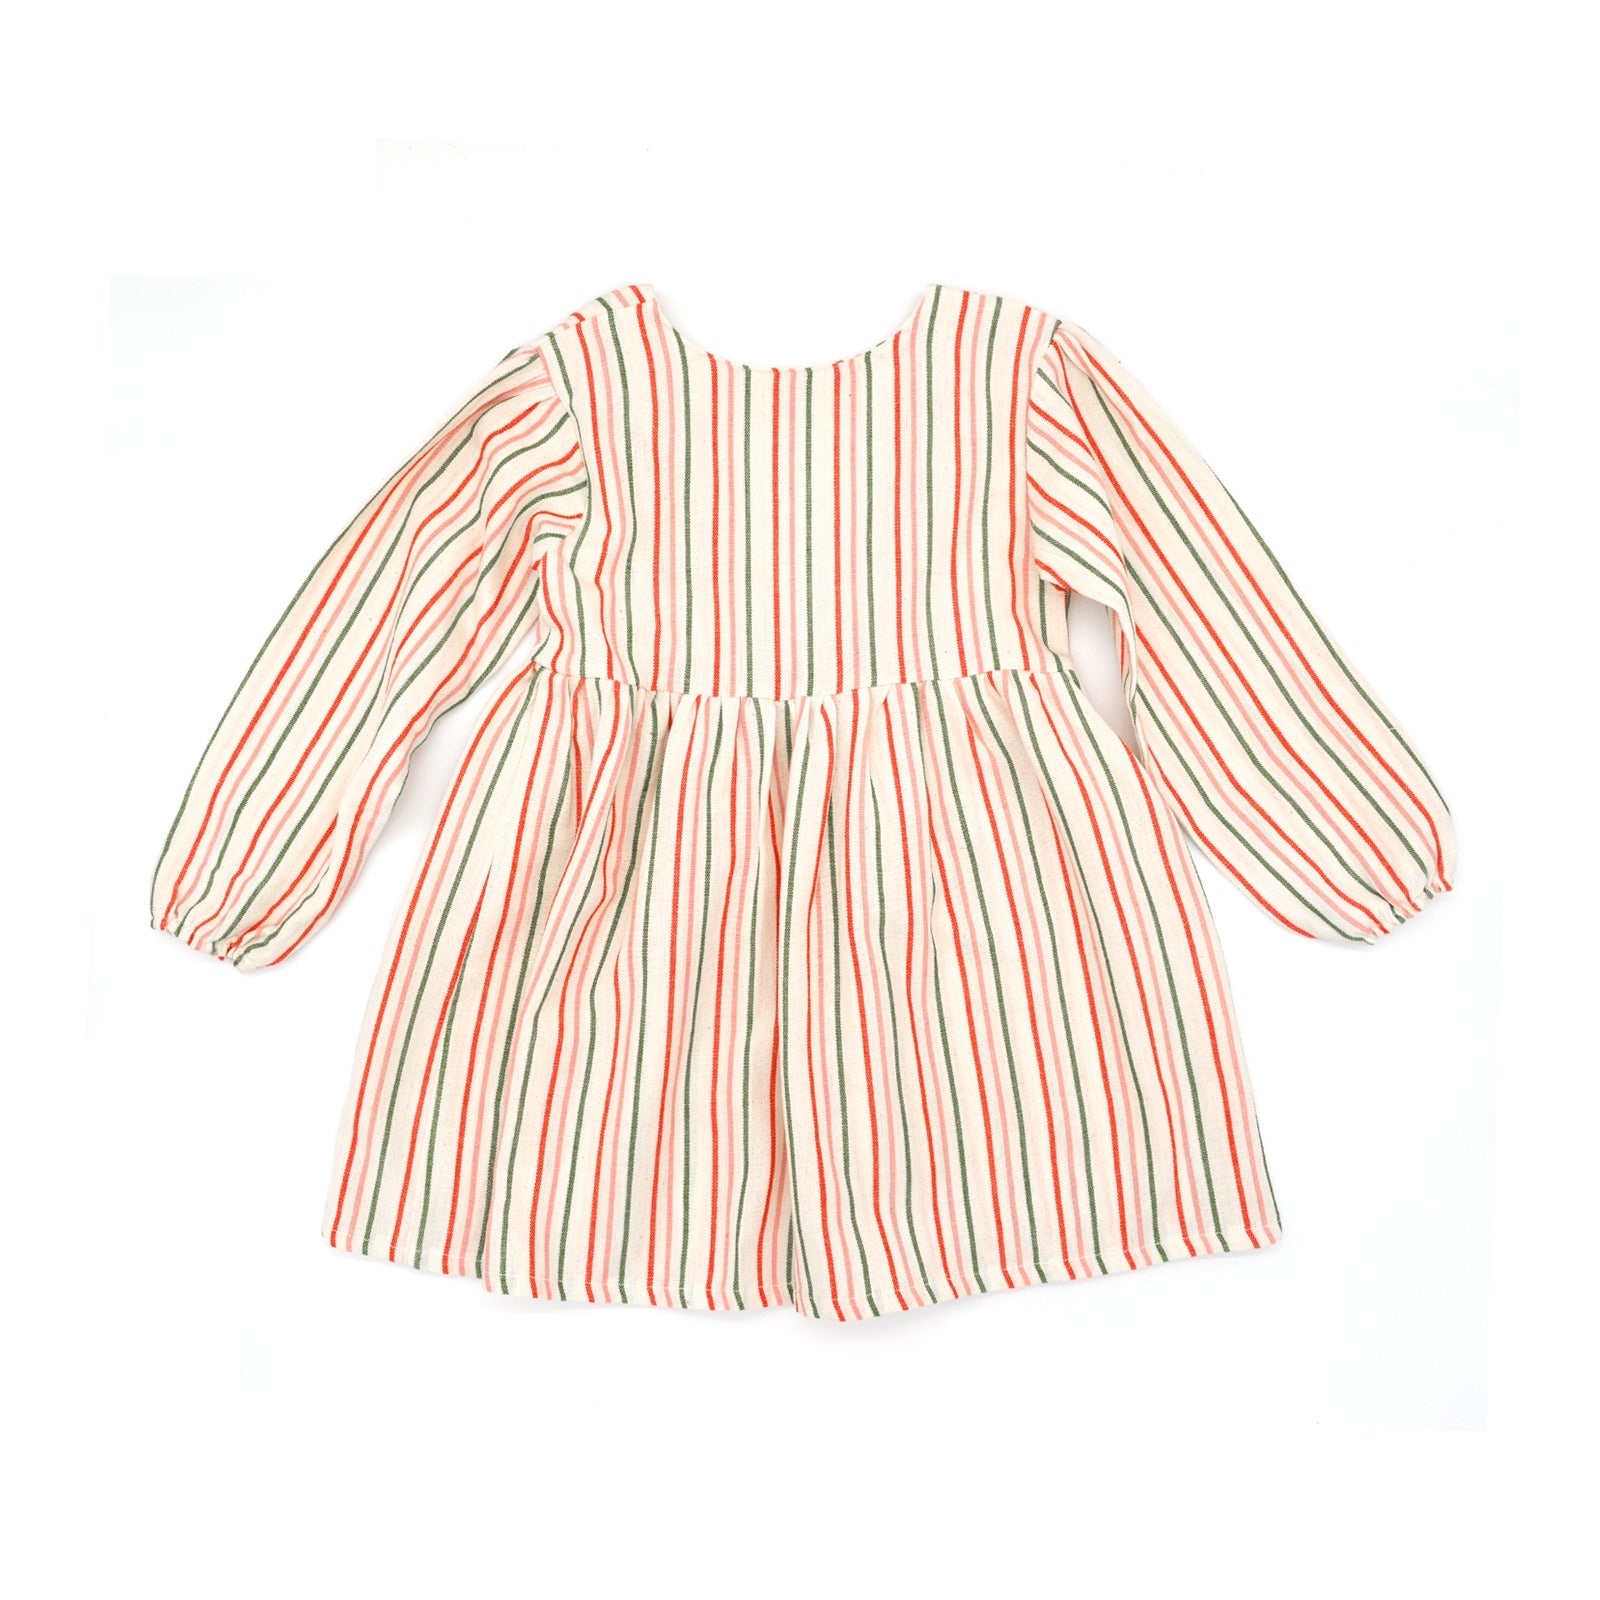 Birdie Girl Dress in Candy Cane by Folklore Las Ninas